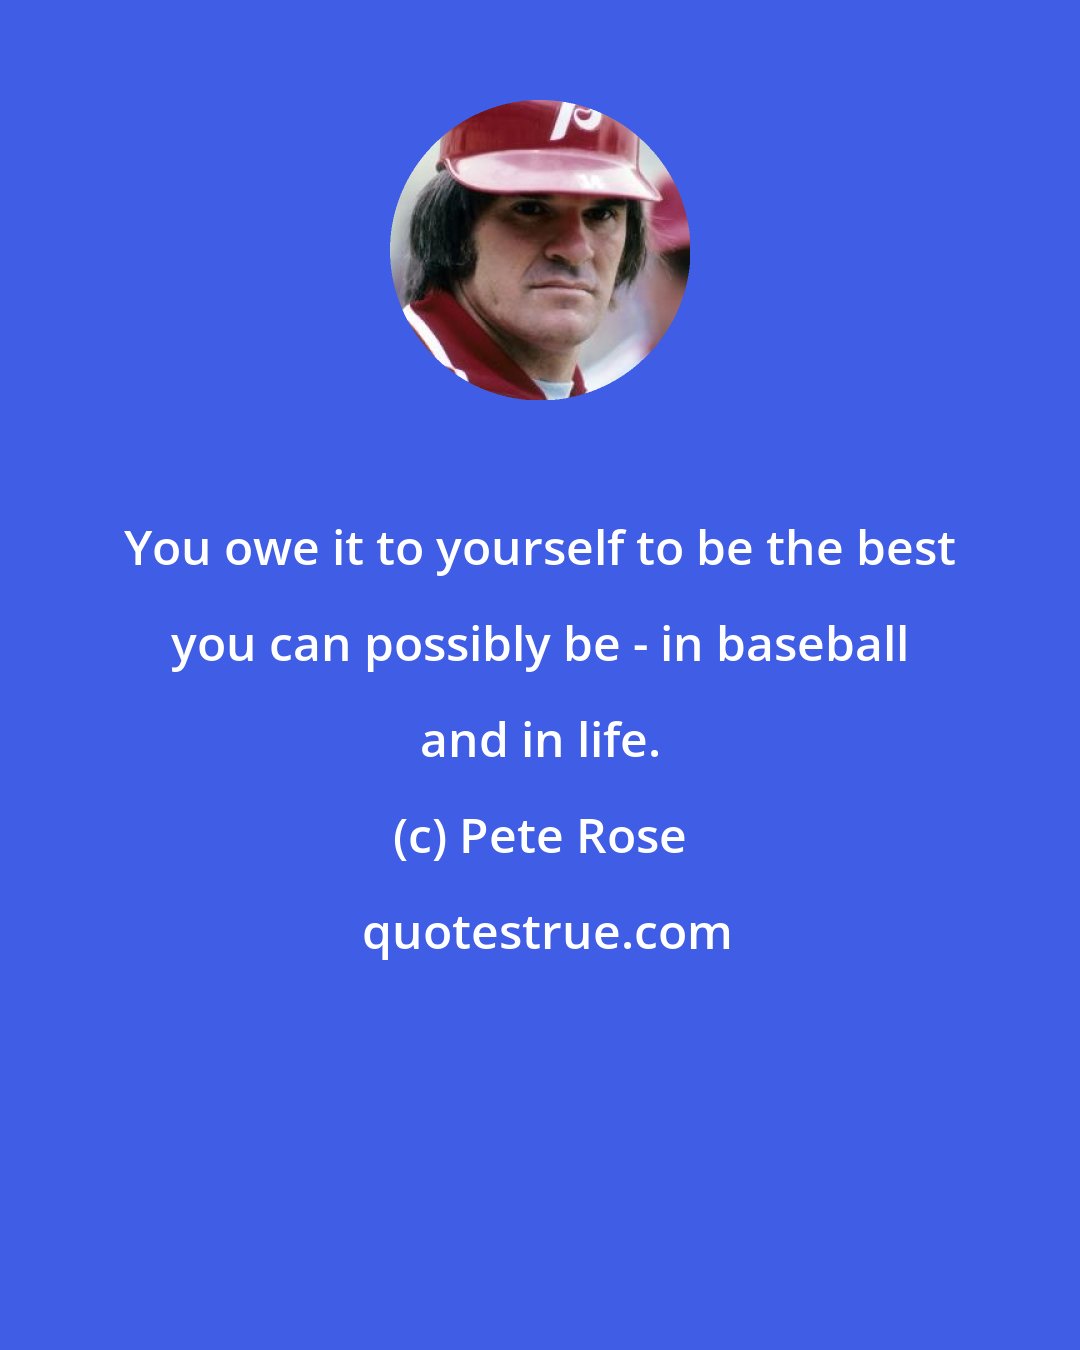 Pete Rose: You owe it to yourself to be the best you can possibly be - in baseball and in life.